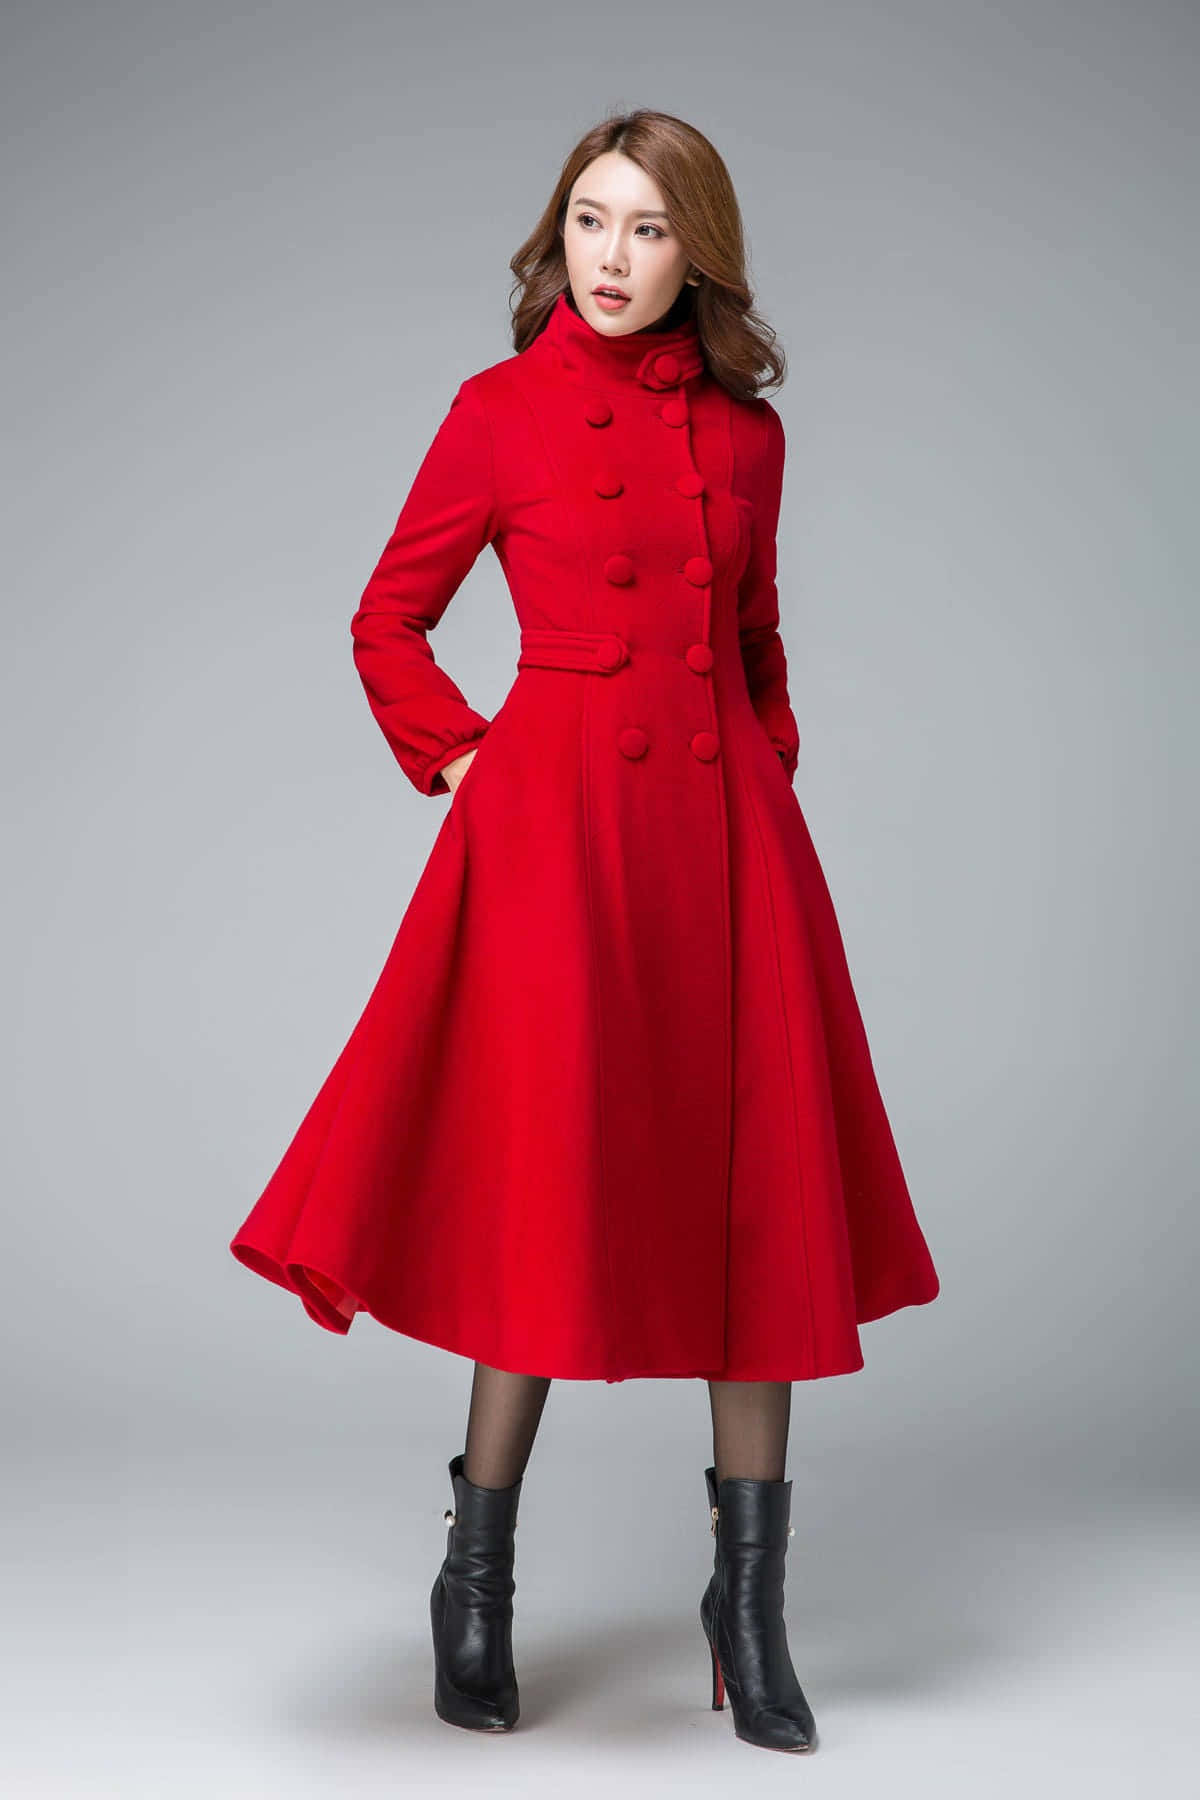 Elegant Woman in a Stunning Red Coat Wallpaper